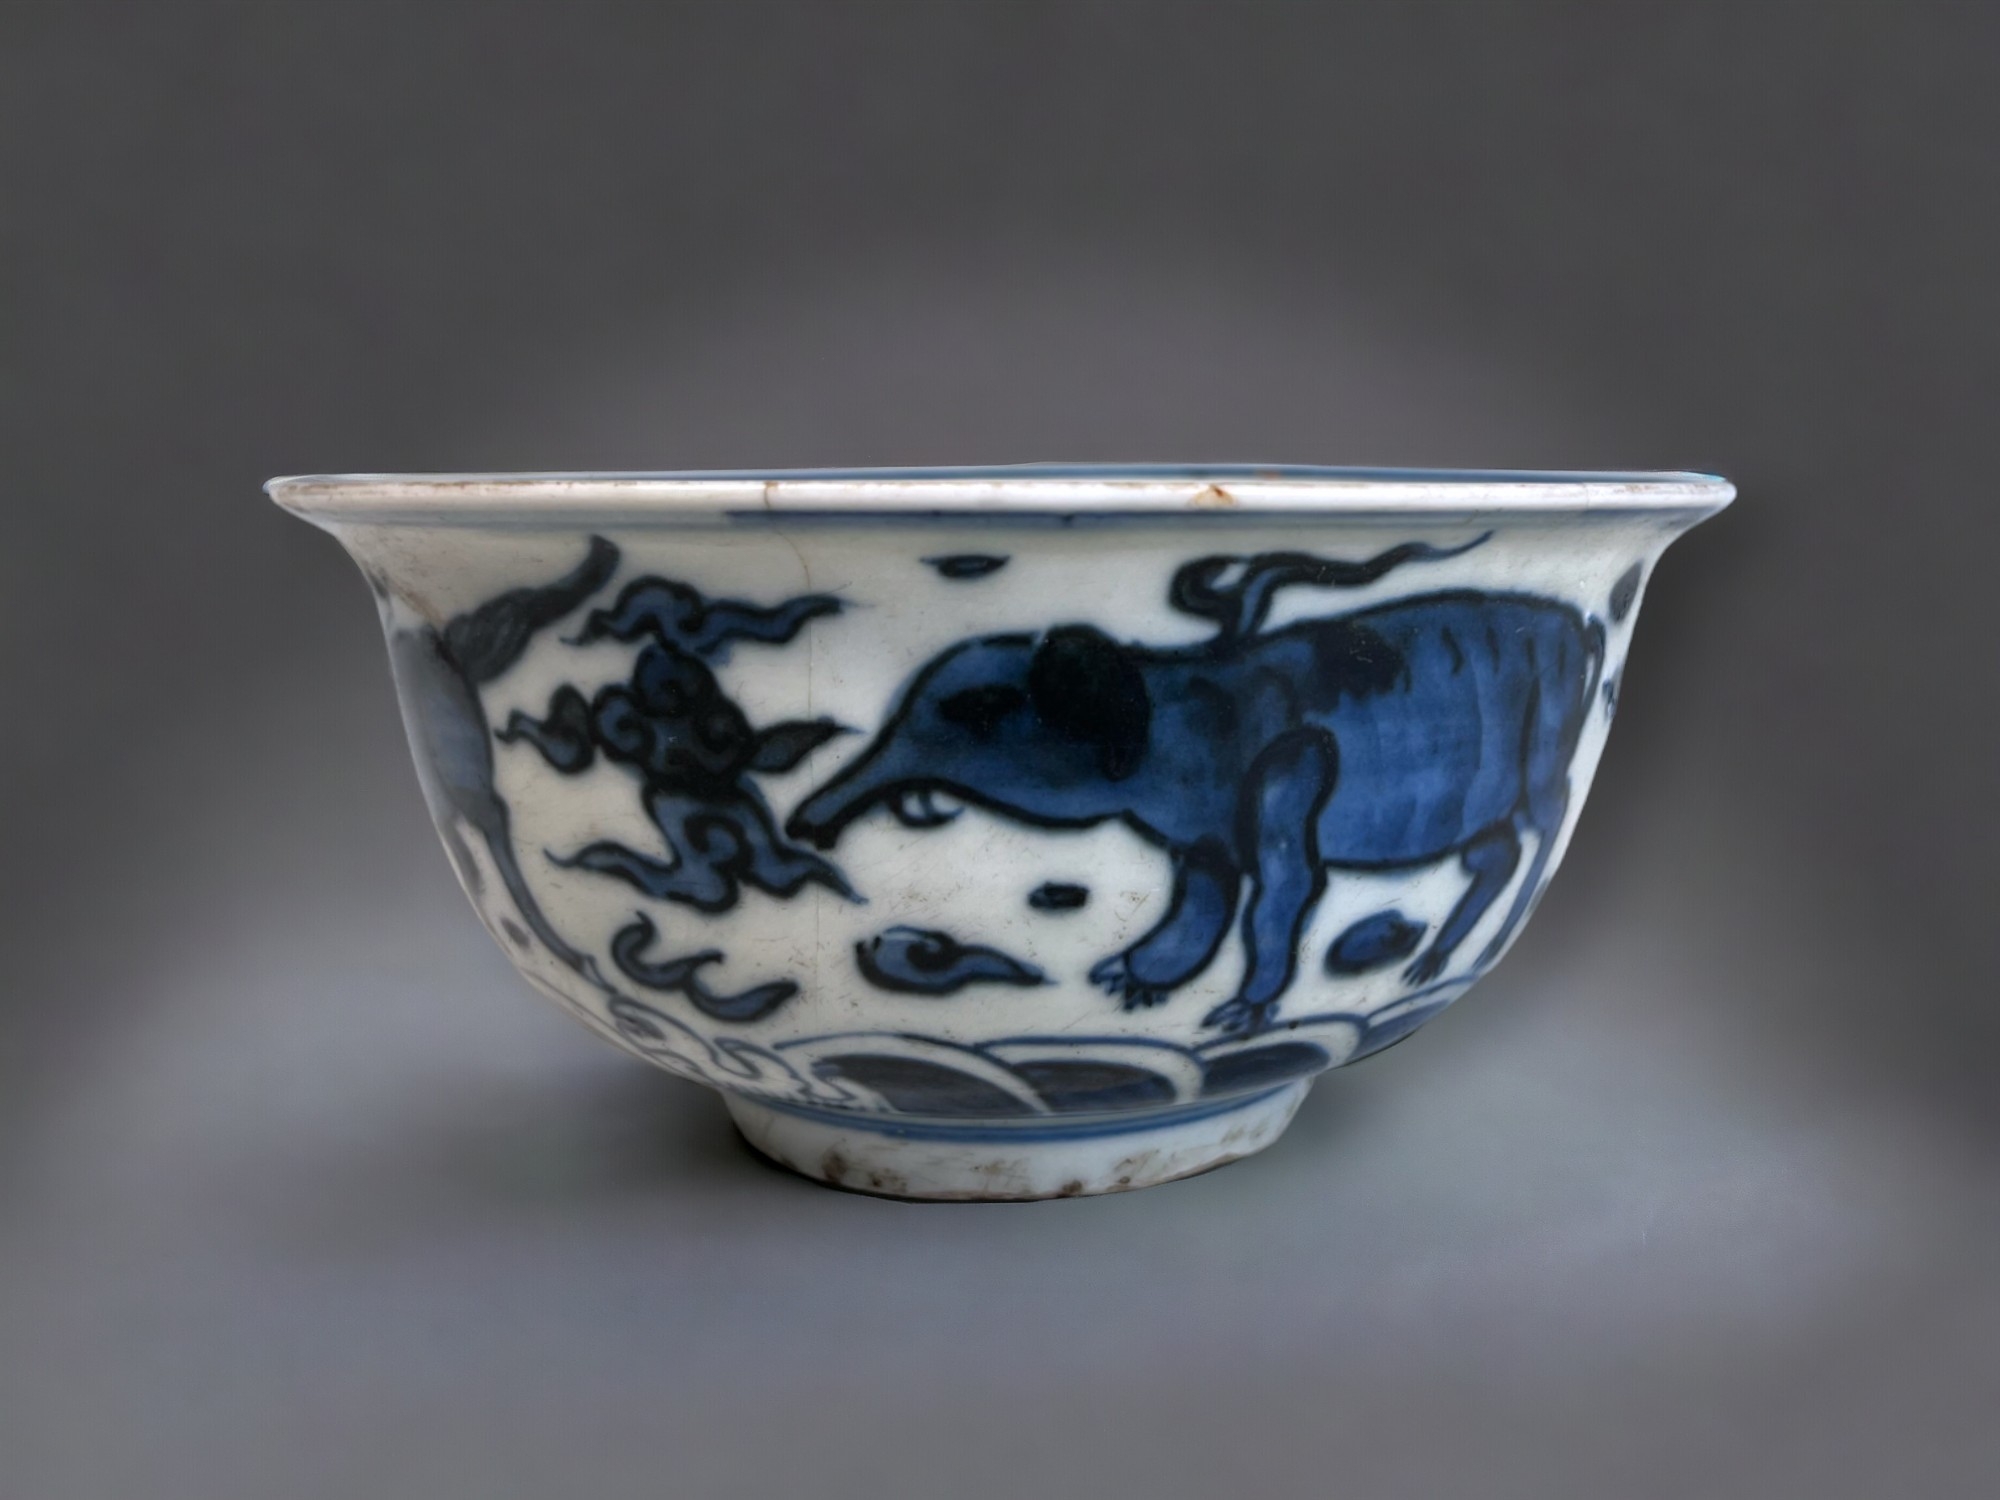 A CHINESE BLUE & WHITE PORCELAIN BOWL. Painted in the Kangxi style, depicting mythical Horse,